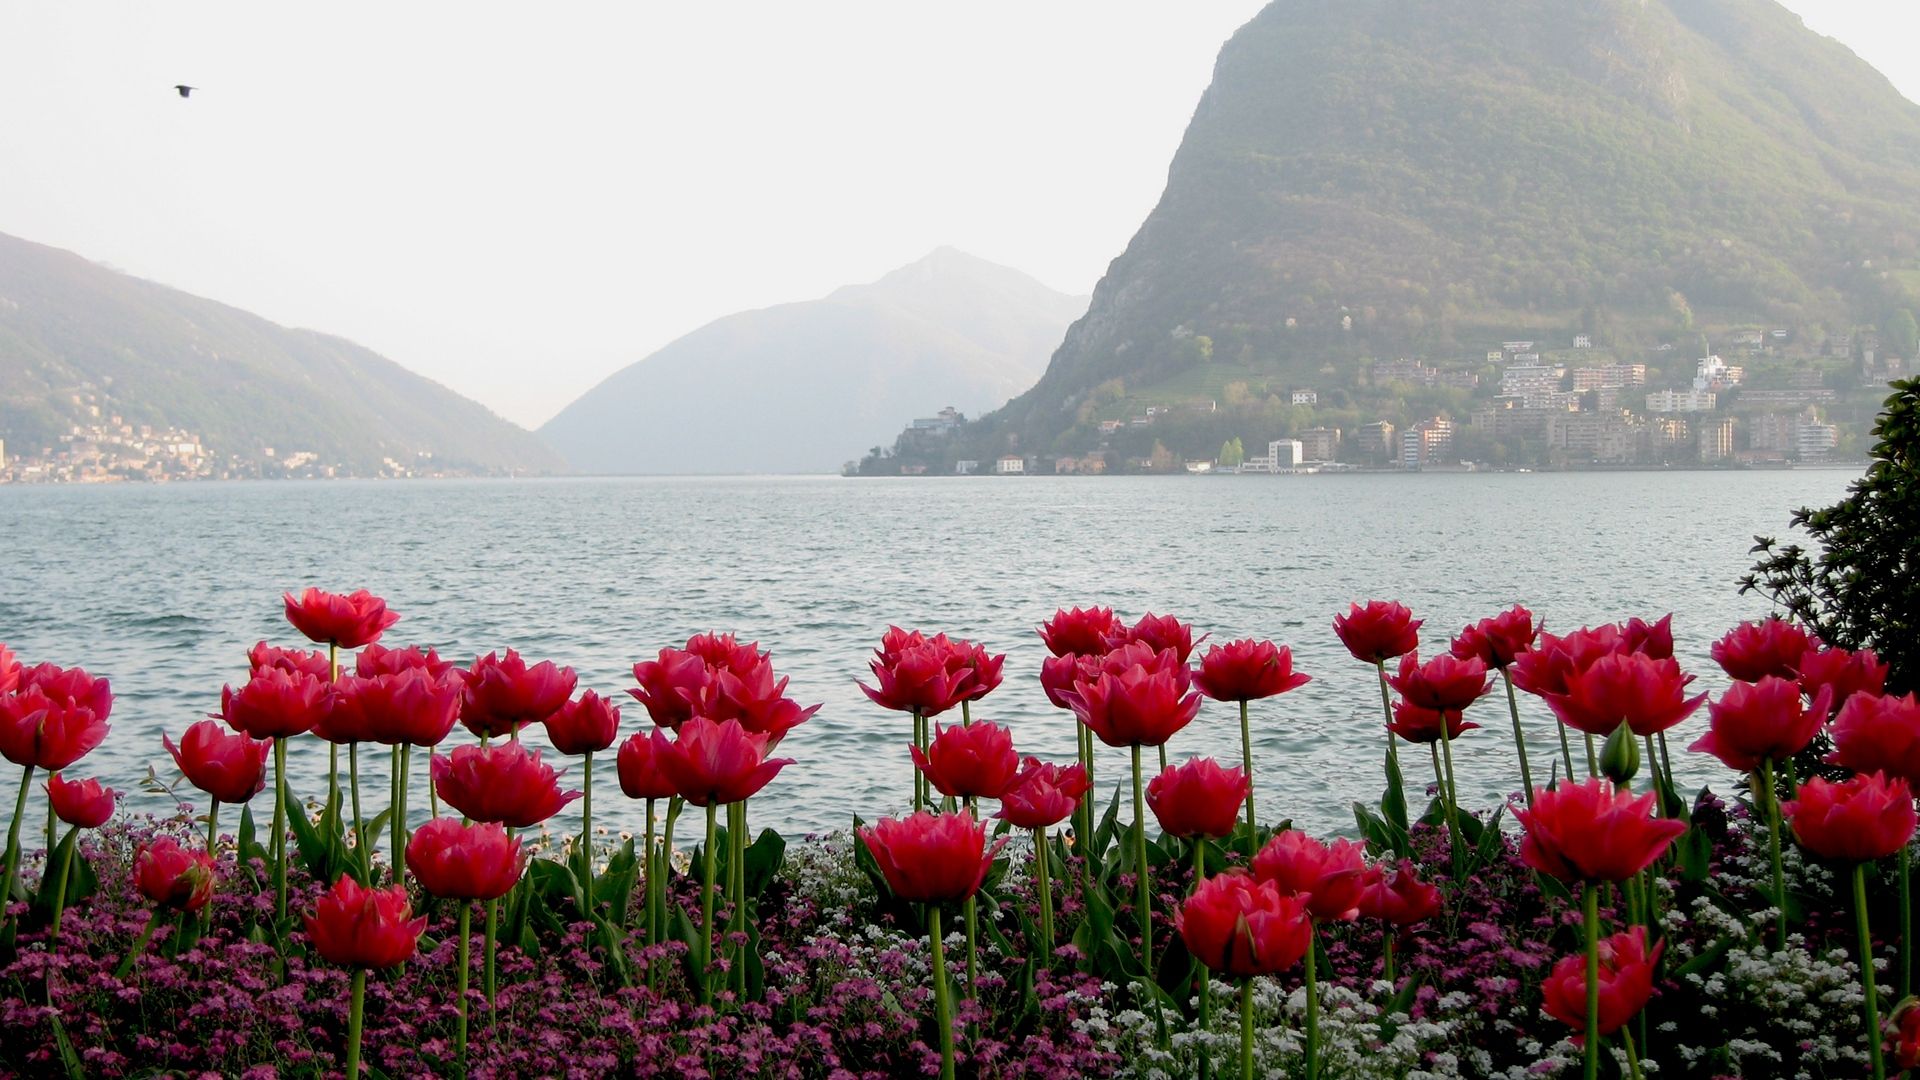 Download wallpaper 1920x1080 tulips, flowers, mountains, water